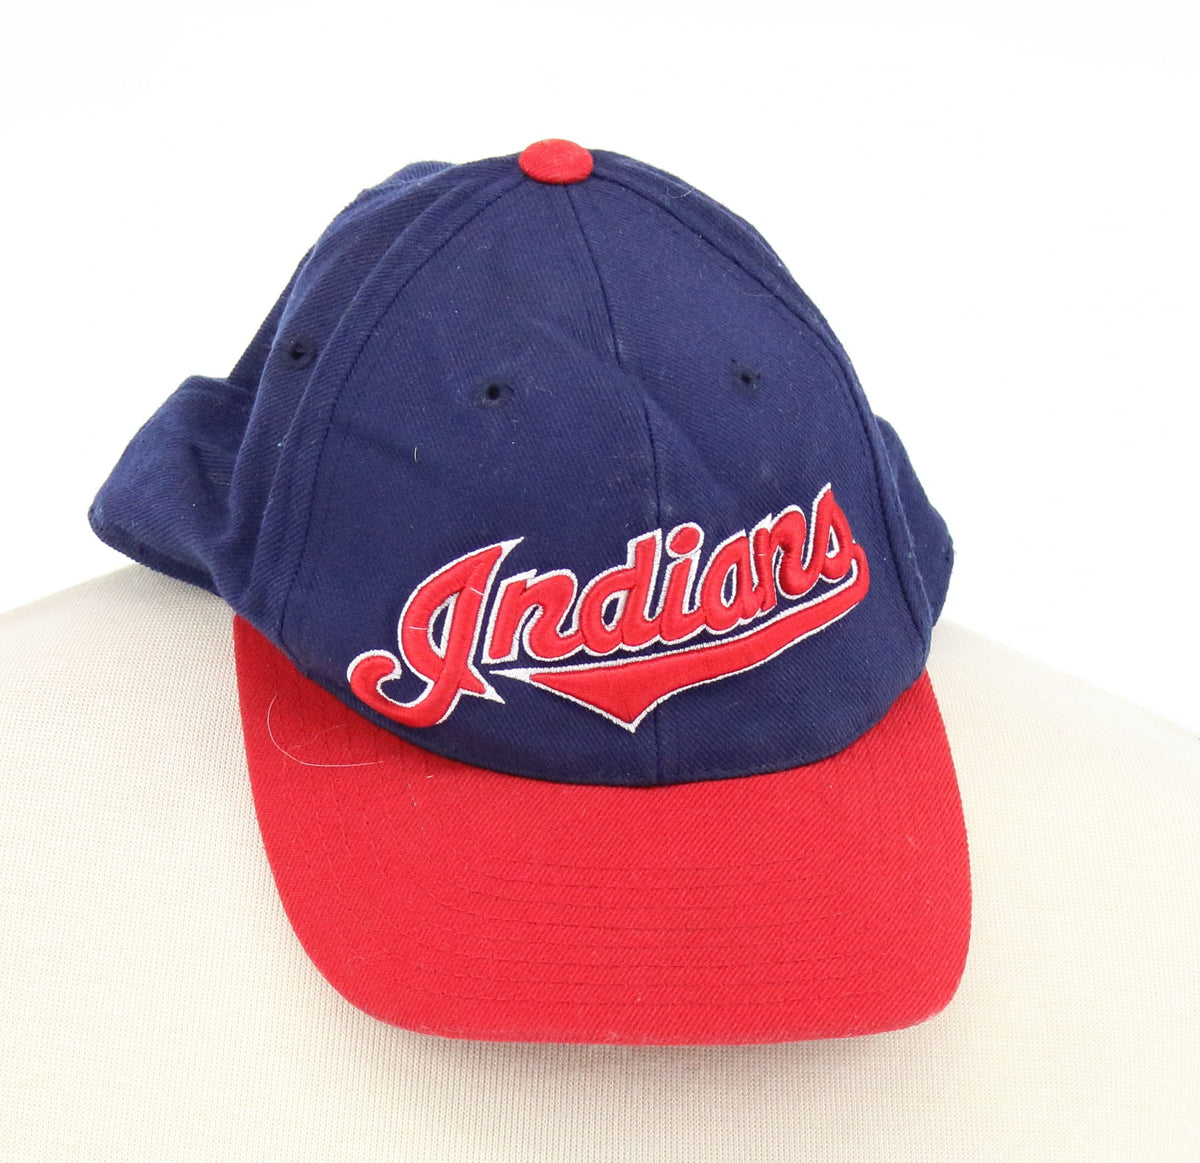 Crown Unique Red And Blue Front And Back Embroided Cap